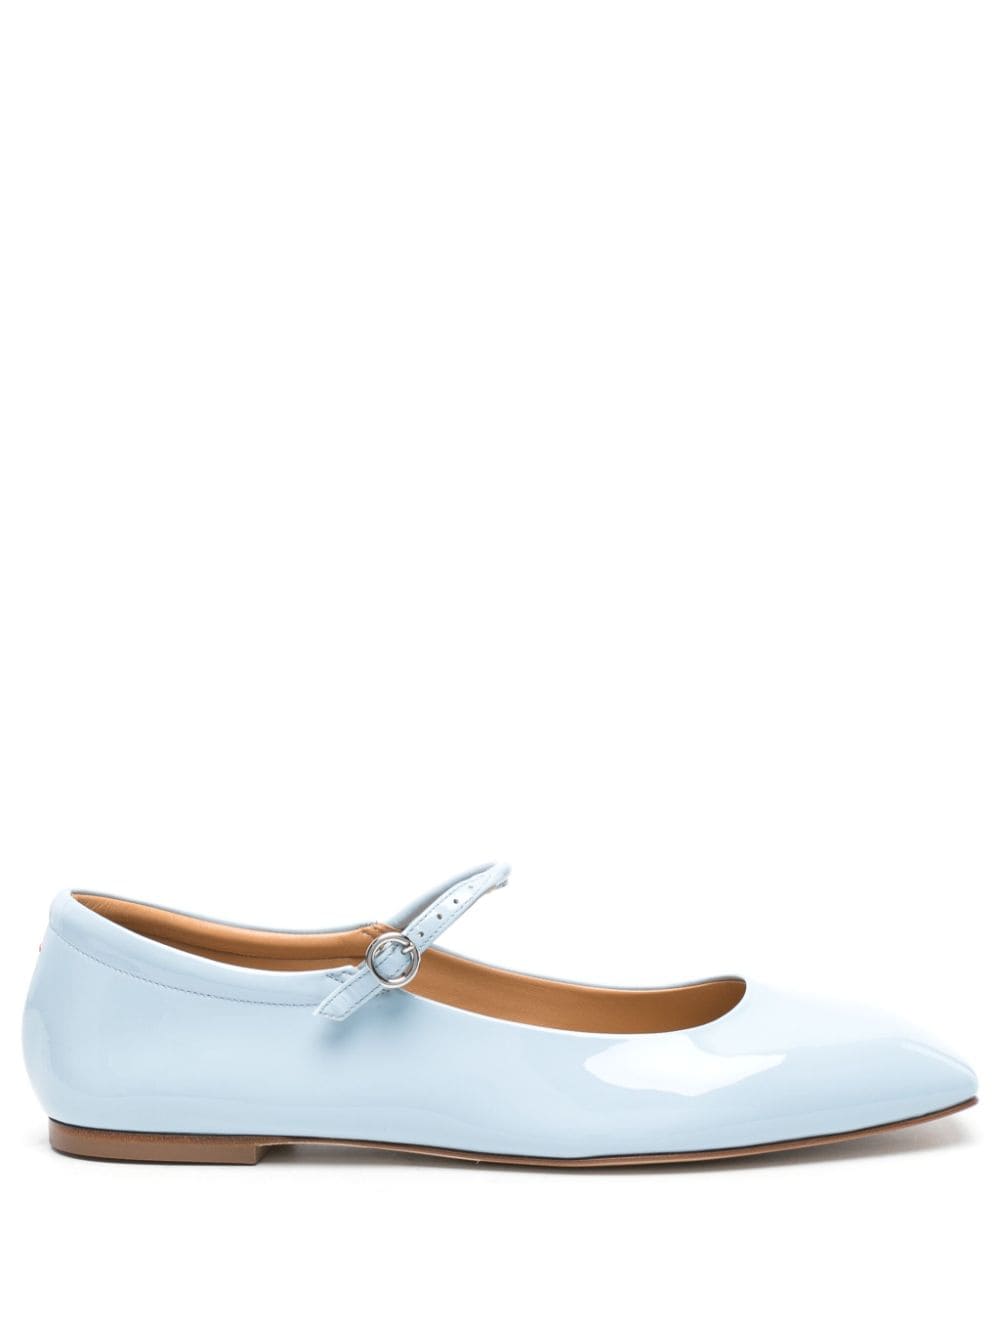 Aeyde Uma patent-leather ballerina shoes - Blue von Aeyde